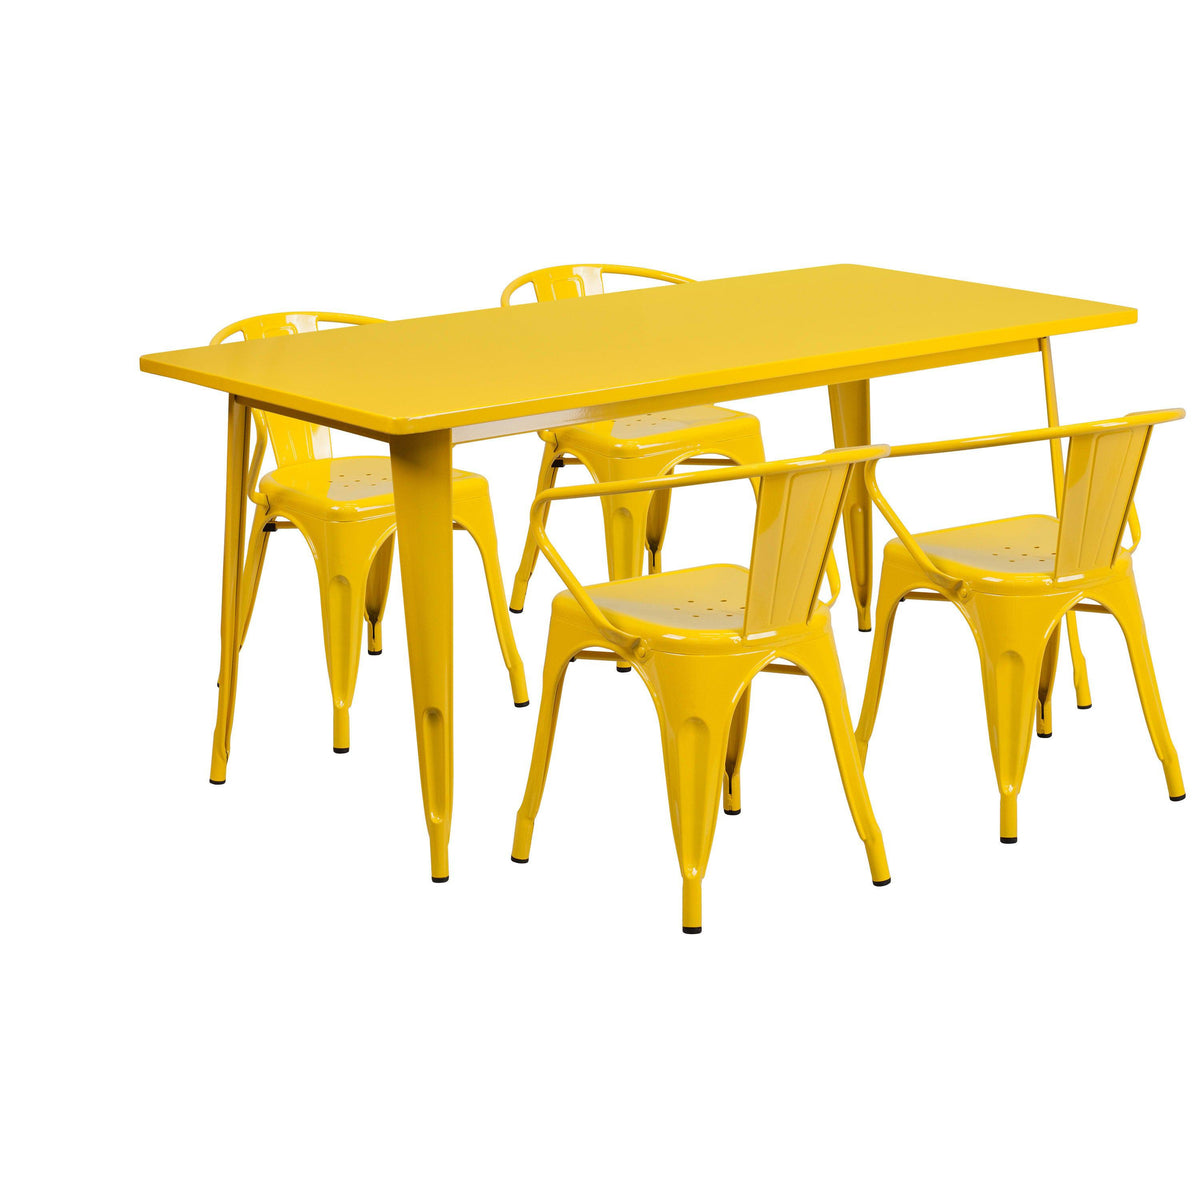 Yellow |#| 31.5inch x 63inch Rectangular Yellow Metal Indoor-Outdoor Table Set with 4 Arm Chairs